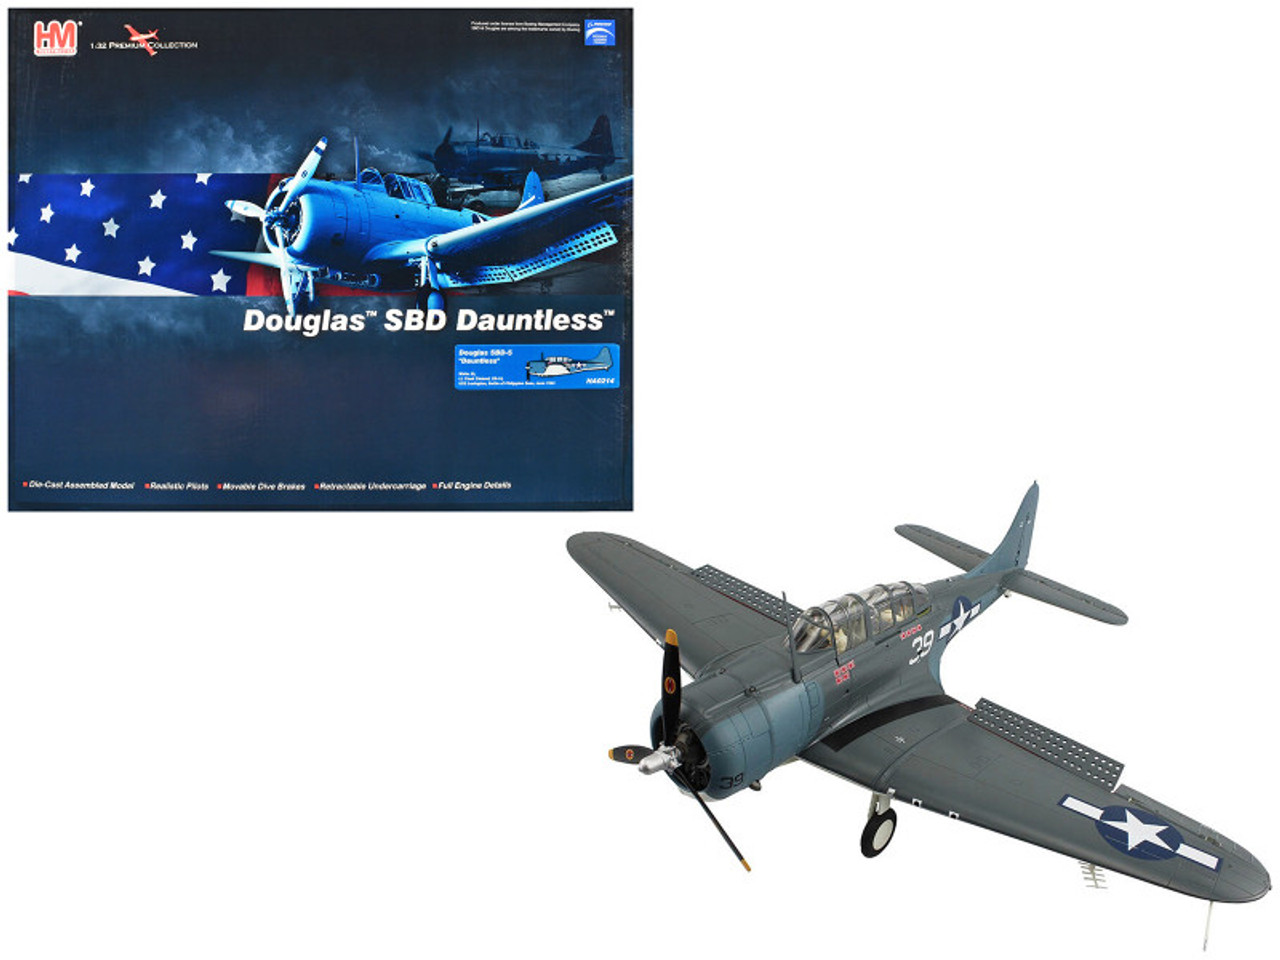 Douglas SBD-5 Dauntless Bomber Aircraft "Lt. Cook Cleland VB-16 USS Lexington Battle of the Philippine Seas" (1944) United States Navy "Premium Collection" 1/32 Diecast Model by Hobby Master